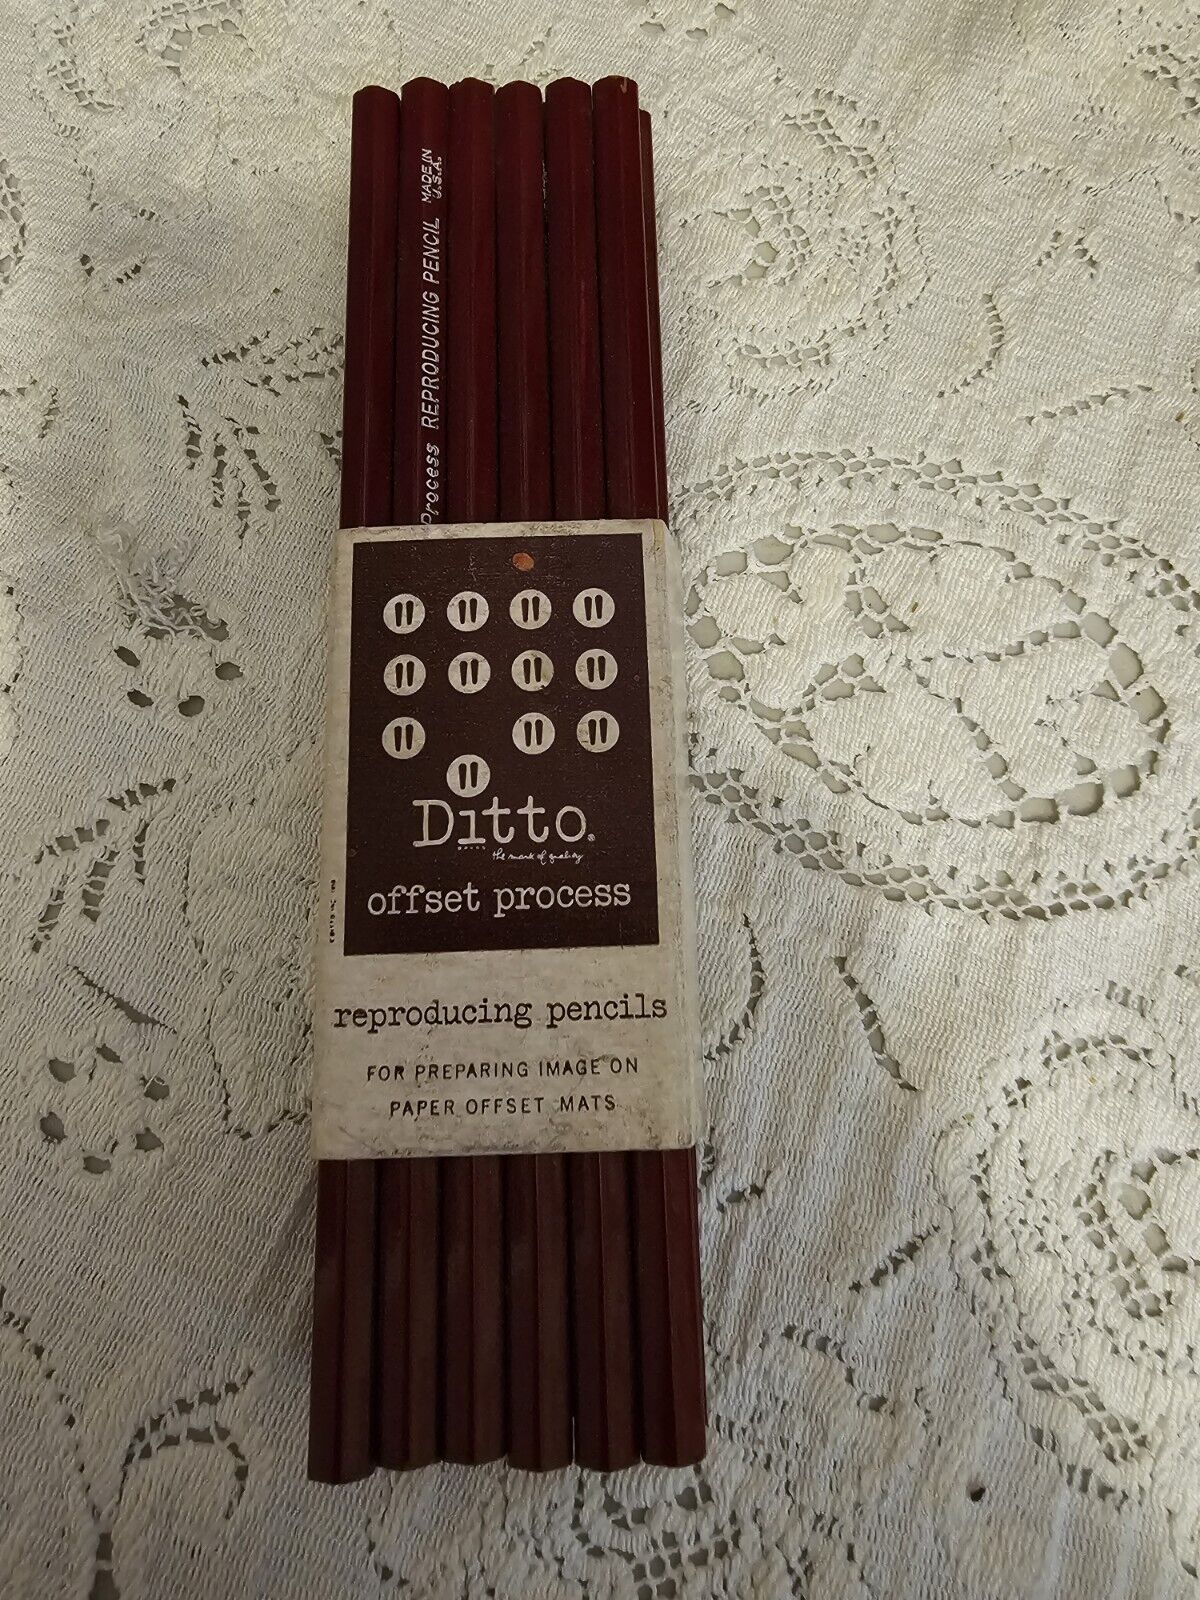 Vintage Ditto Offset Process Reproducing Pencils New Old Stock Pack Of 12